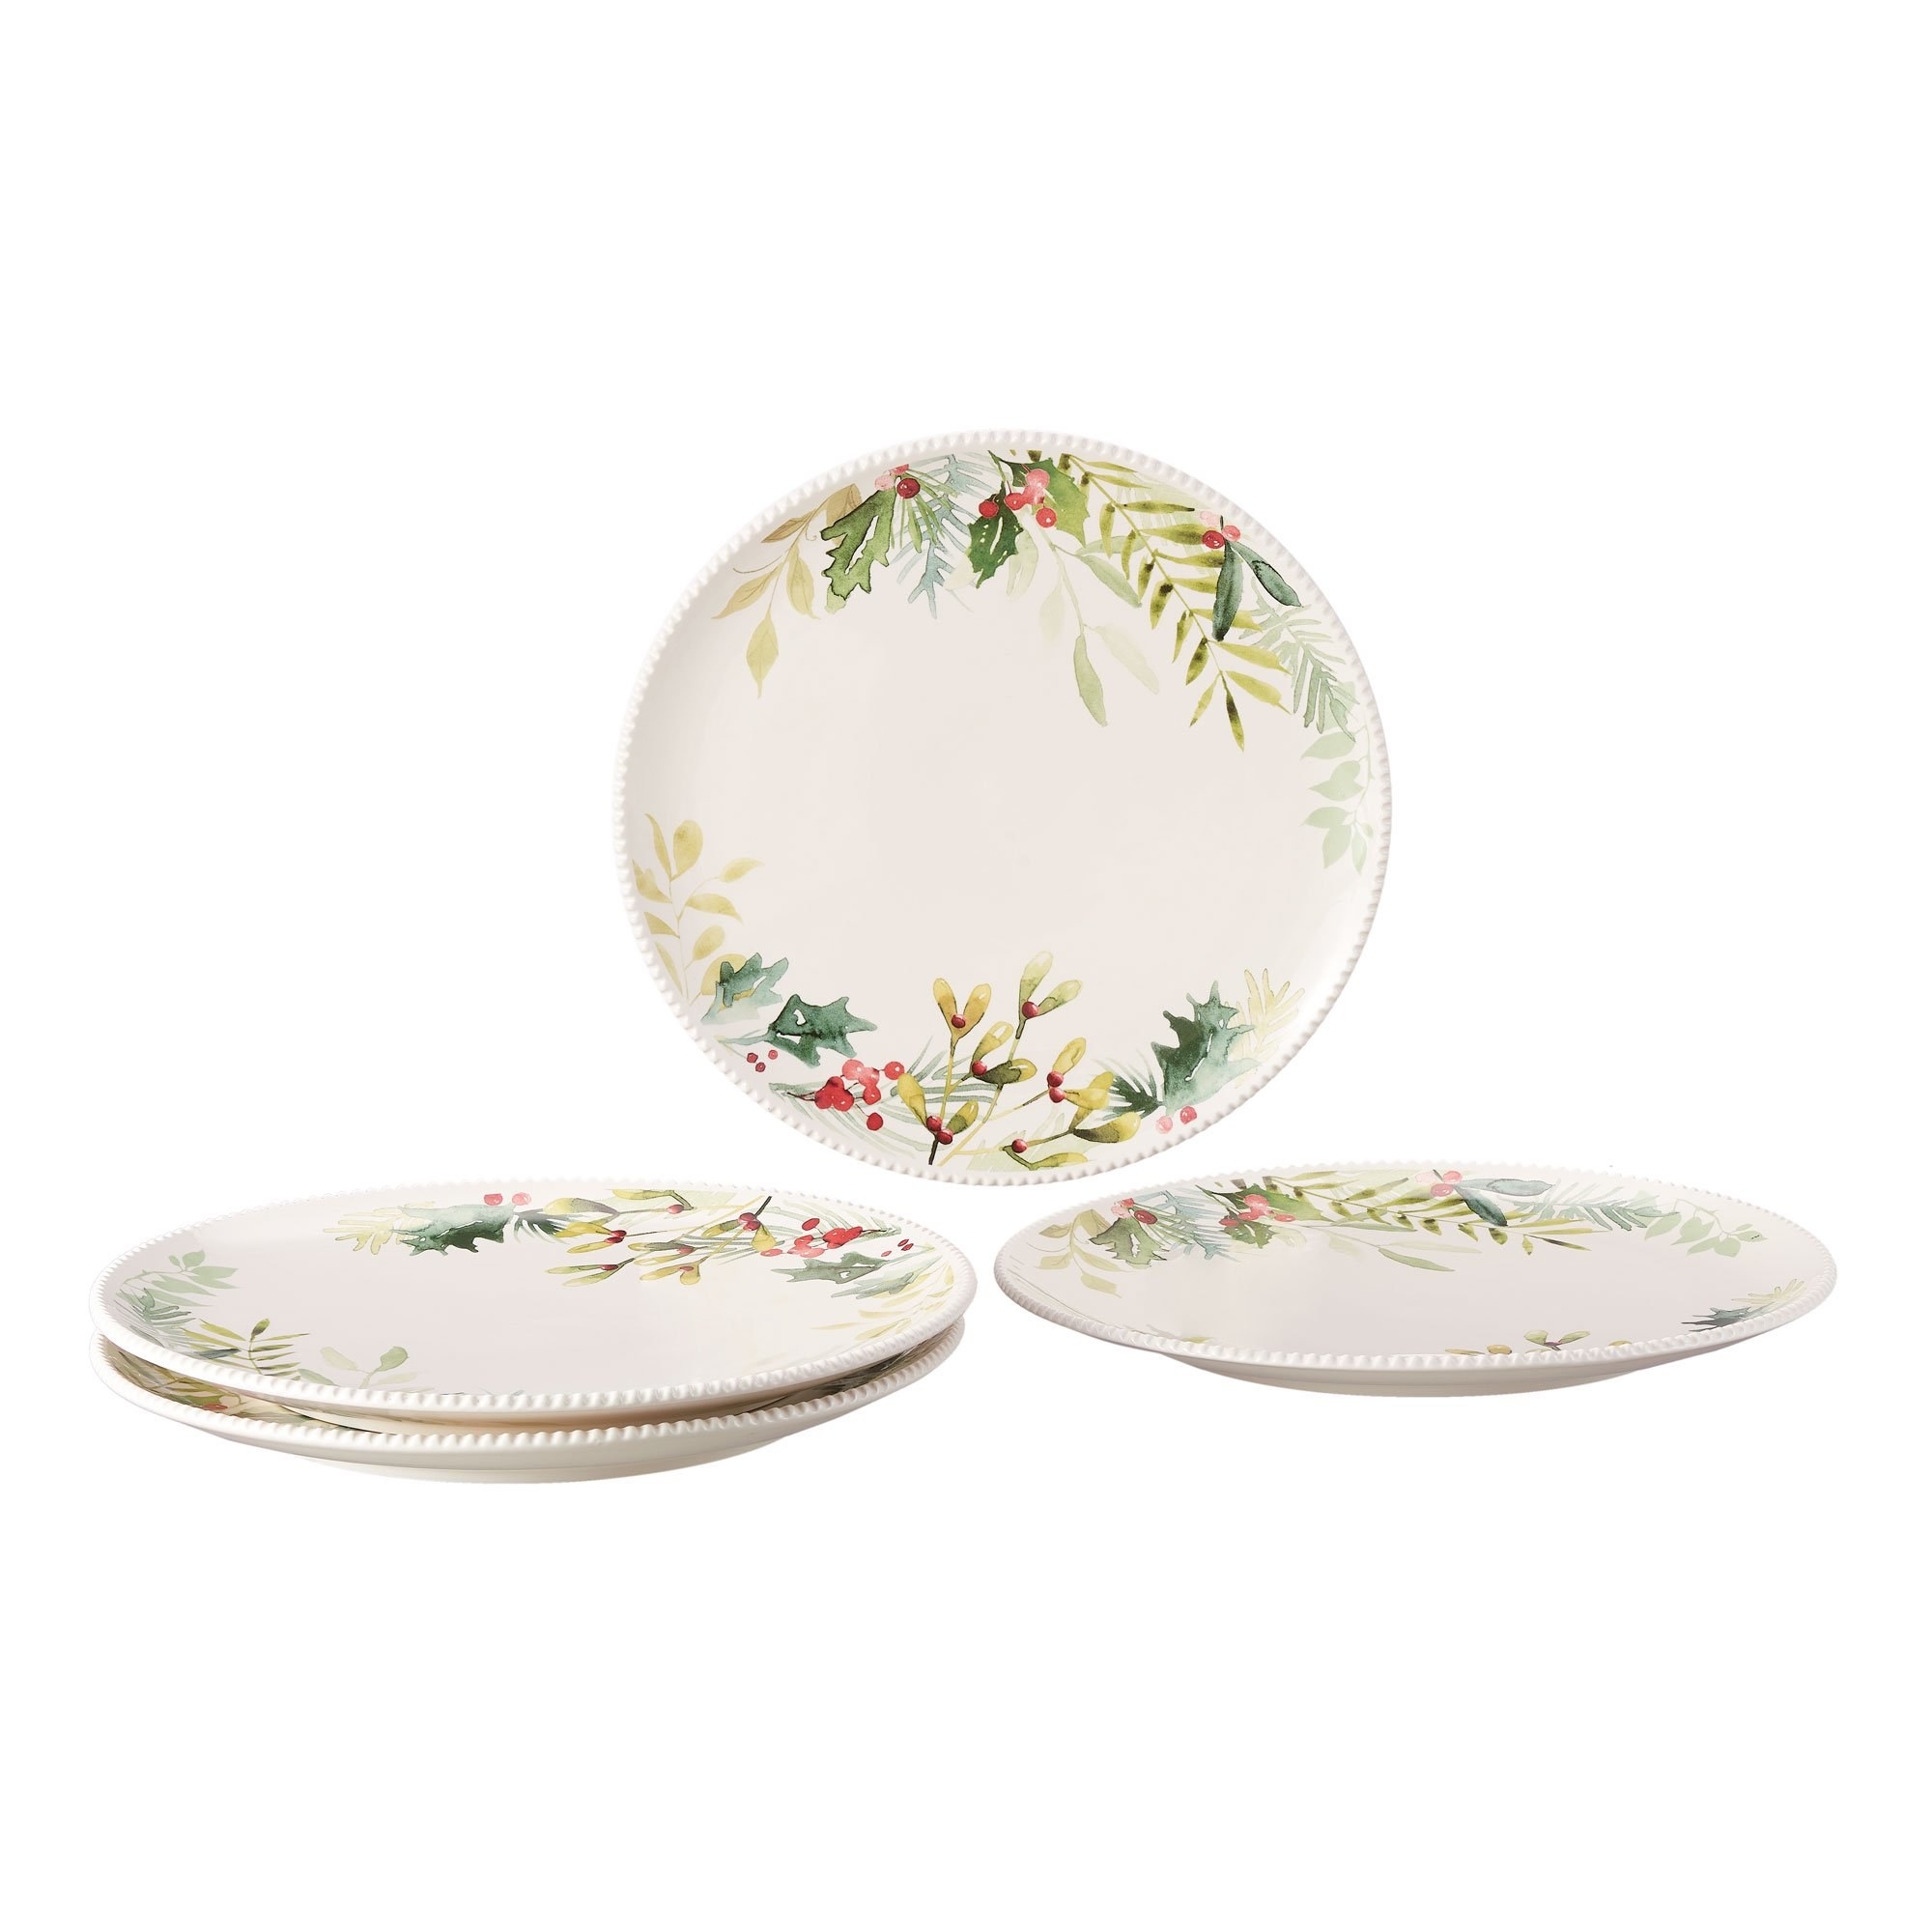 Four holiday plates: on the left, two are stacked on top of each other; on the right, one rests by itself; behind them, one is tilted toward the camera on display